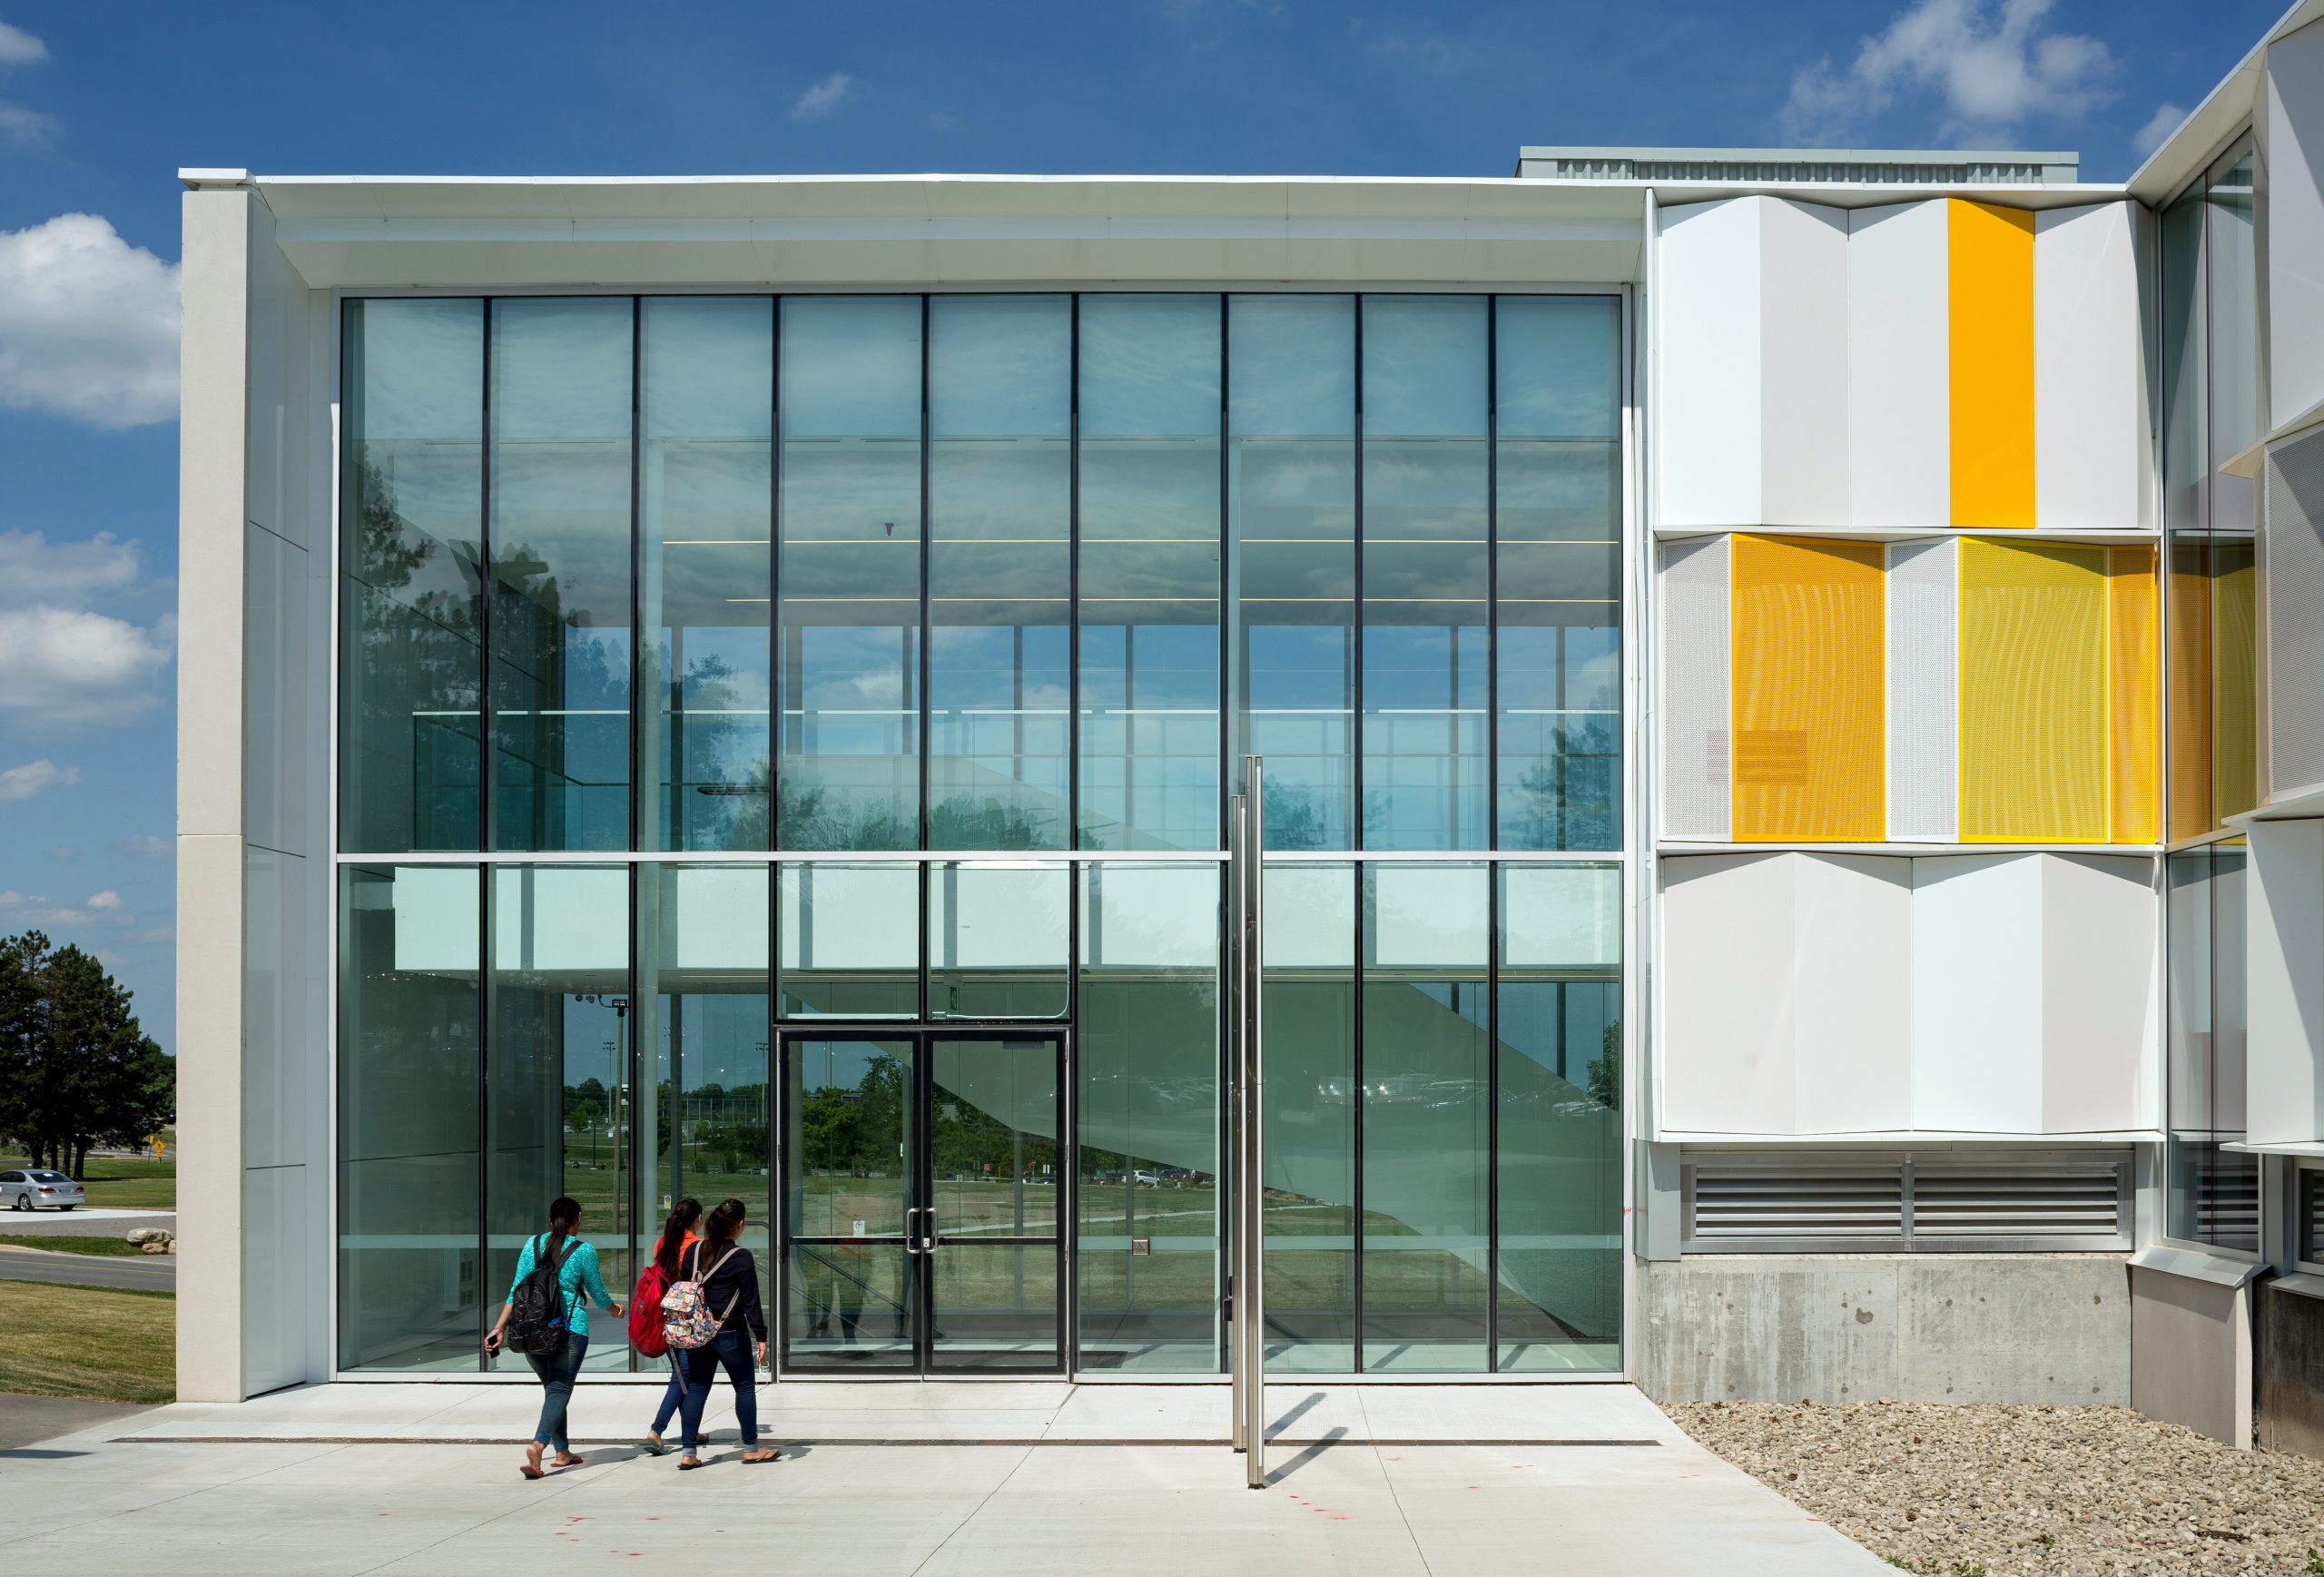 An image of Sutherland Campus building located in Peterborough